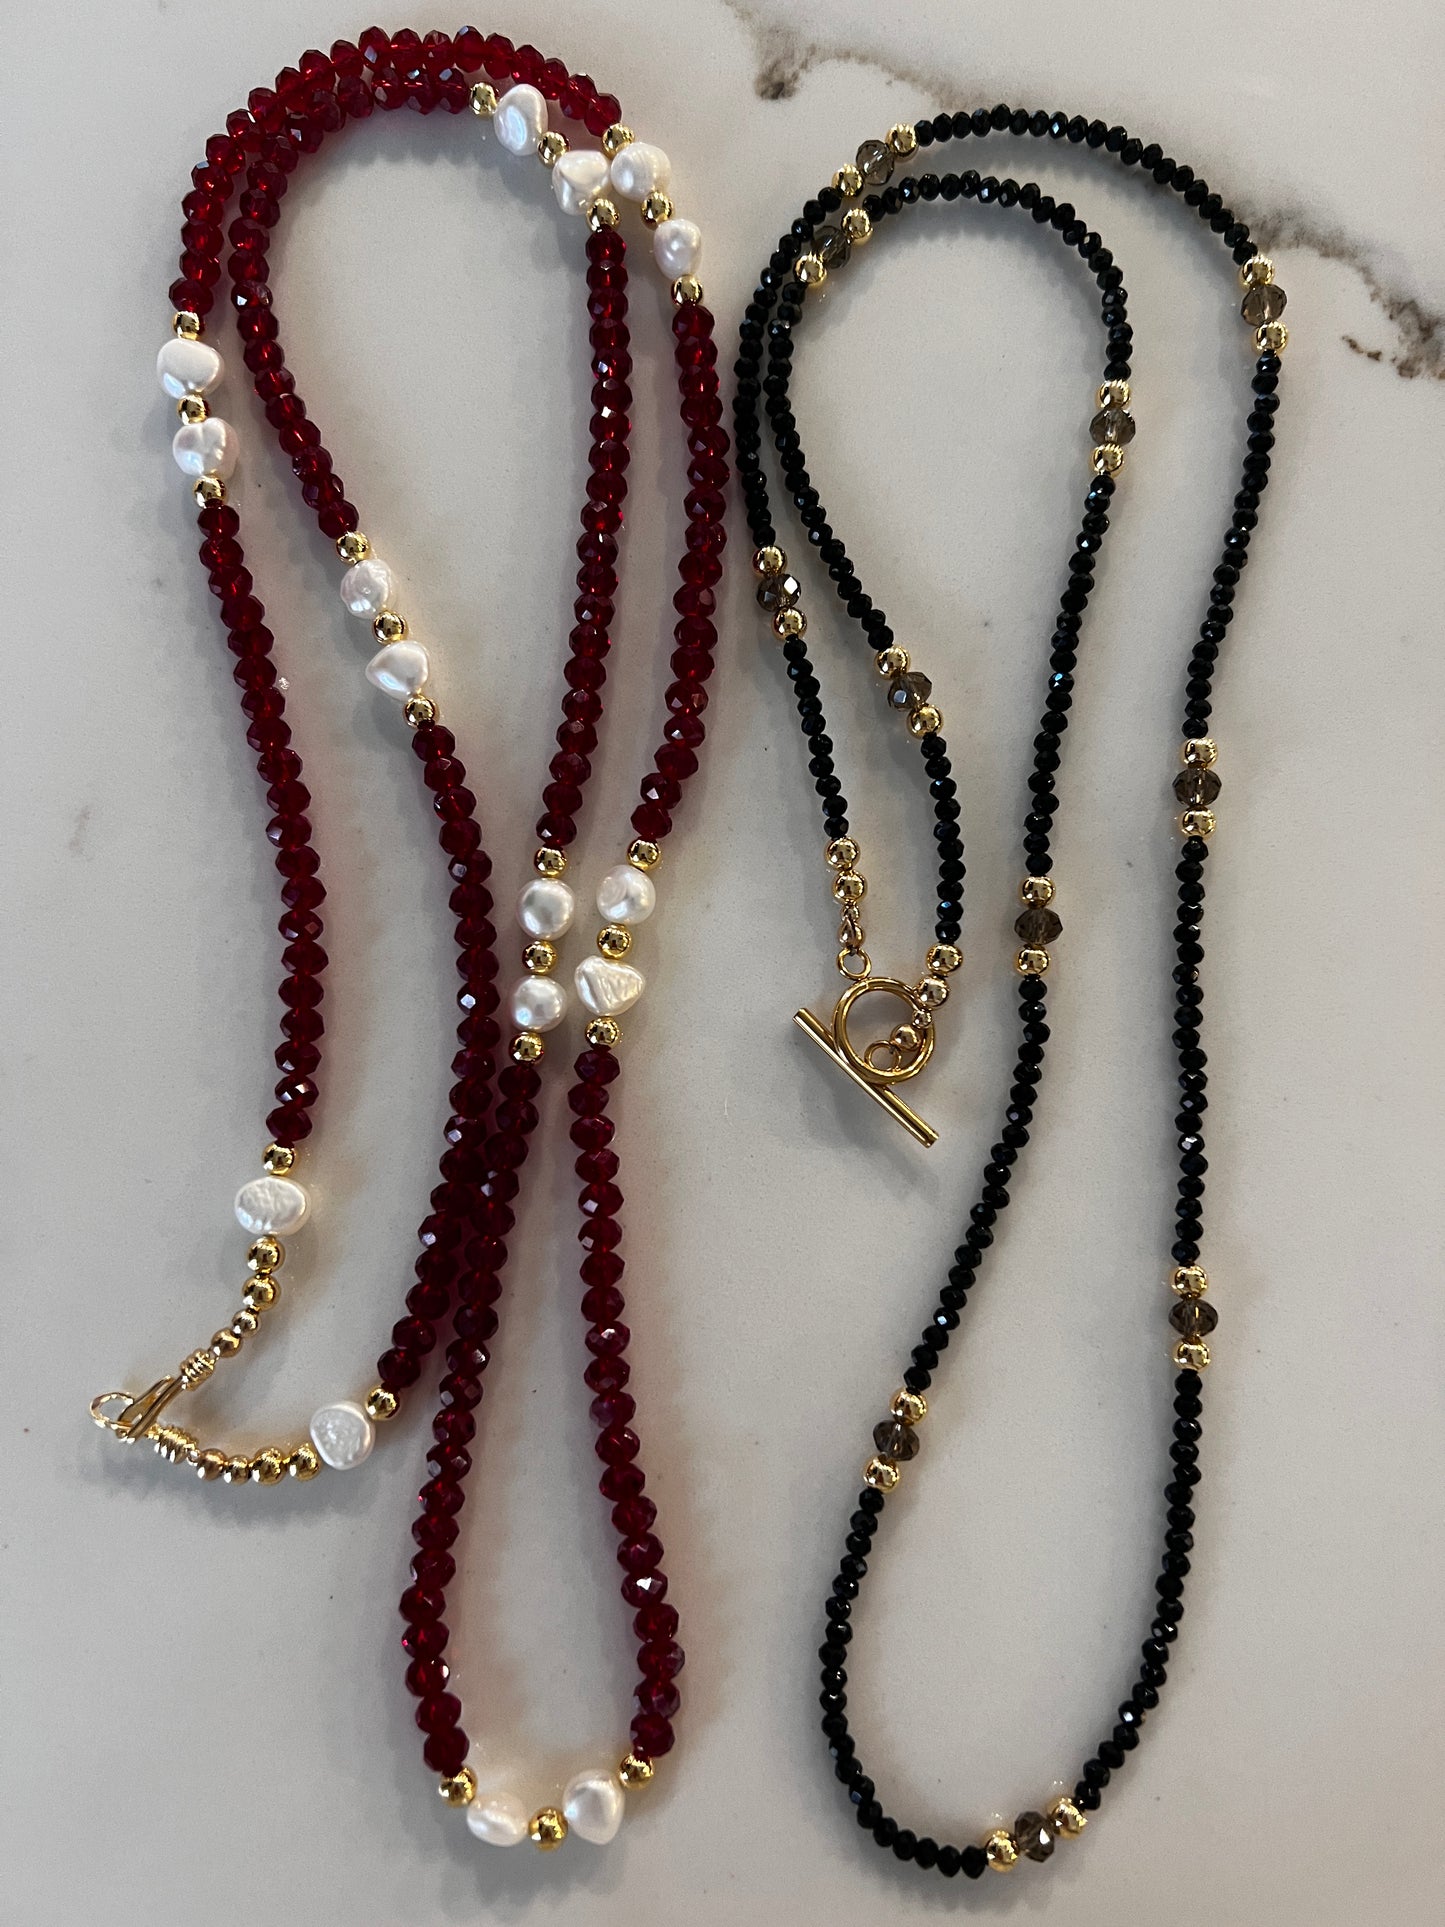 Crystal Hand Beaded Necklaces